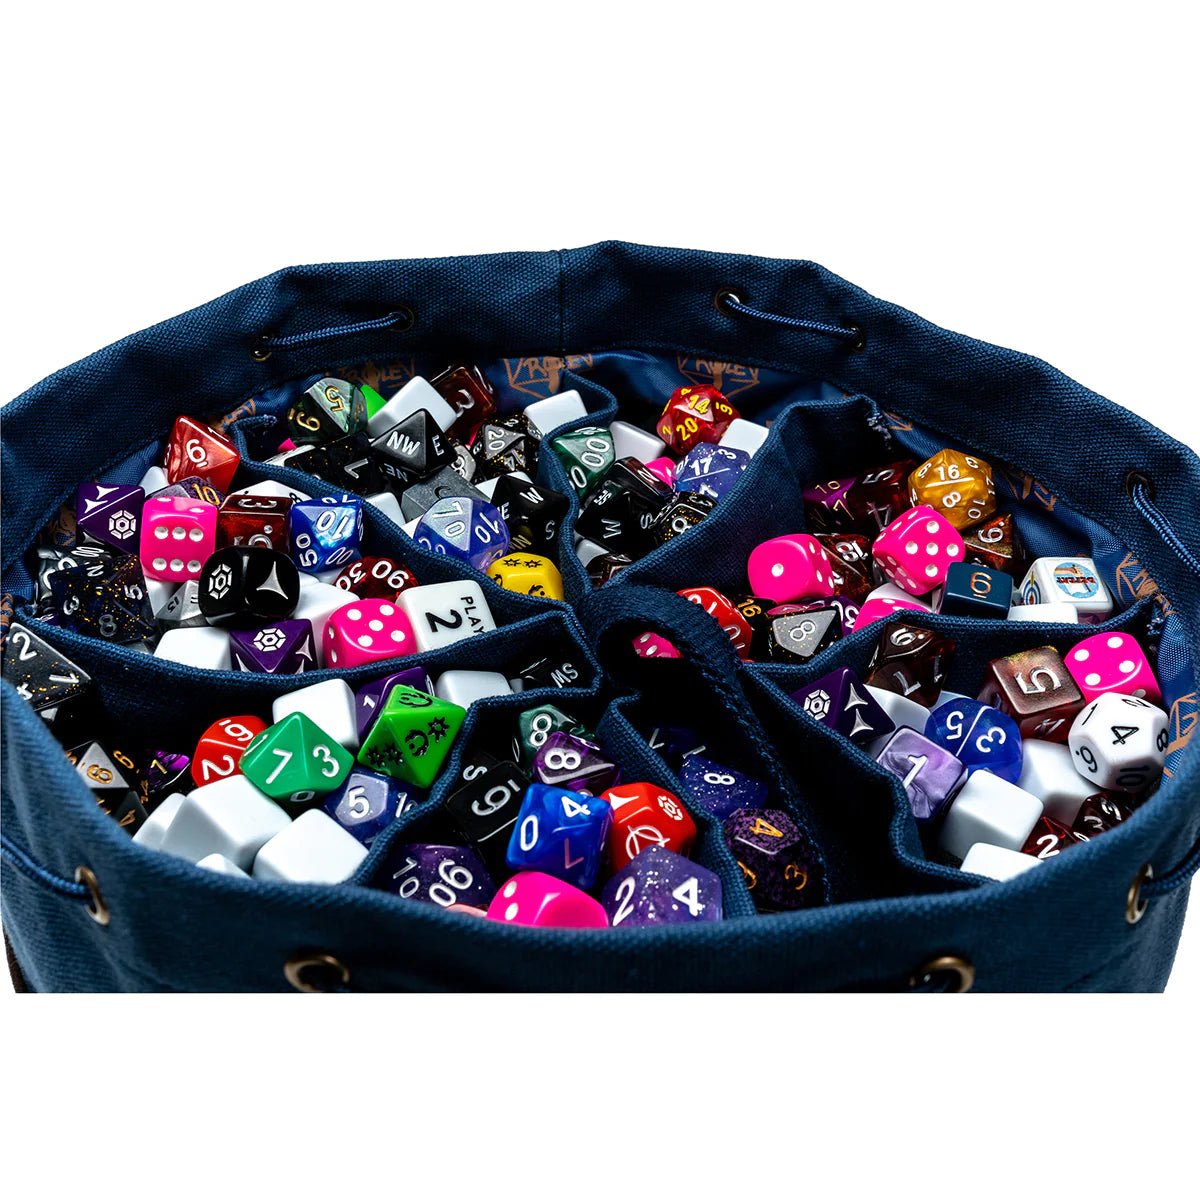 Bailey's Blue Dice Bag of Hoarding - The Fourth Place